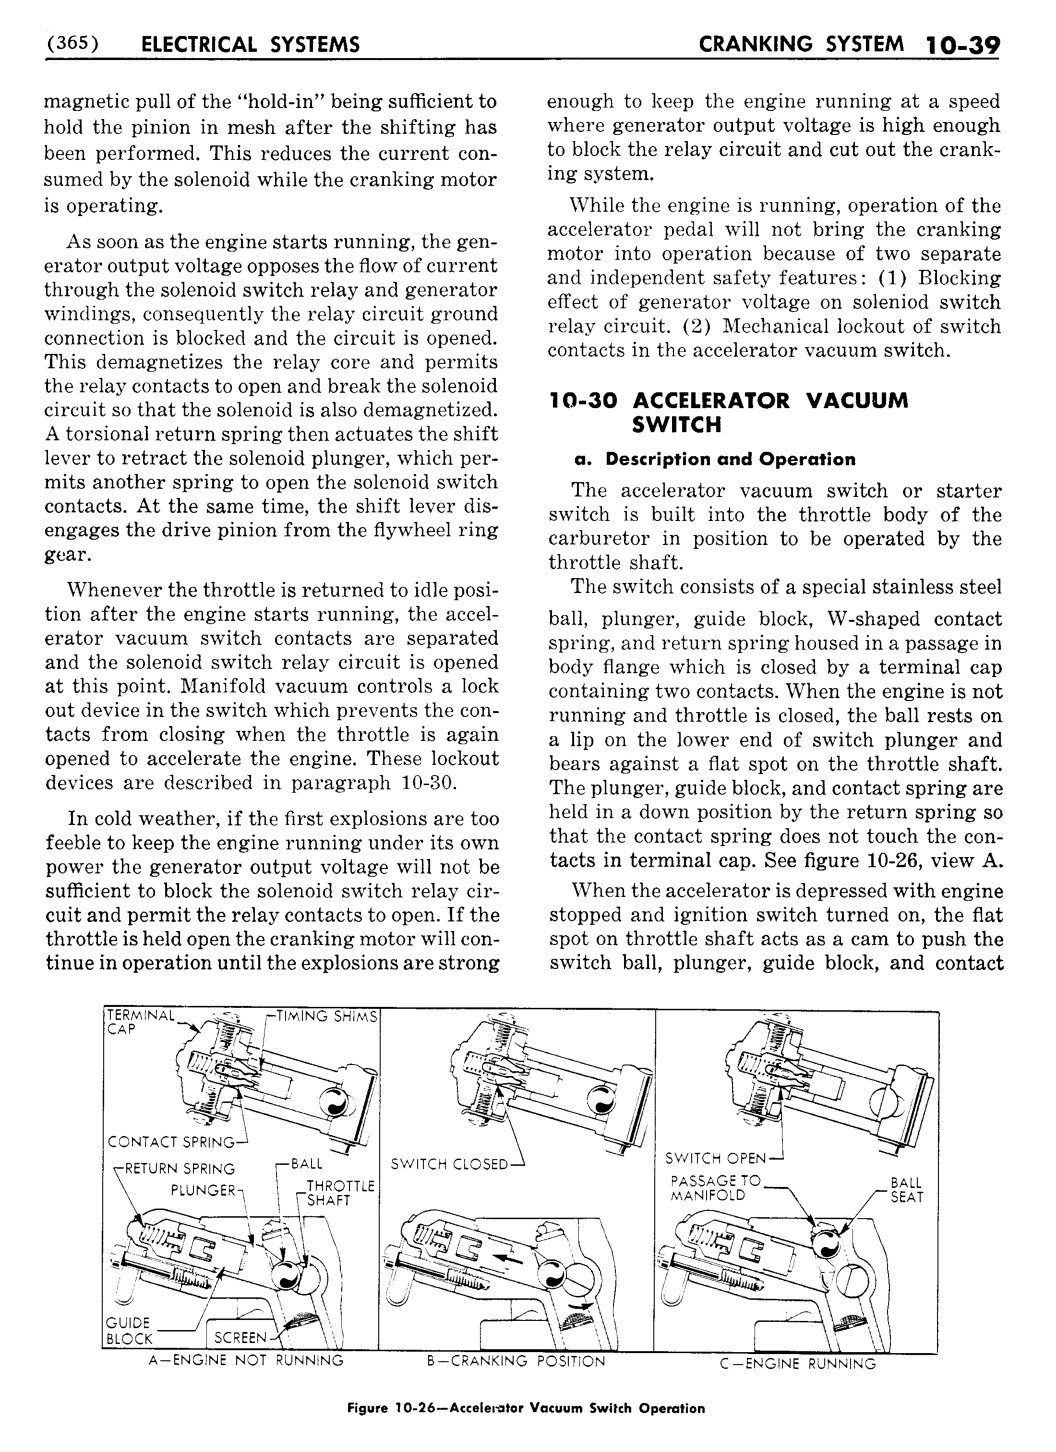 n_11 1956 Buick Shop Manual - Electrical Systems-039-039.jpg